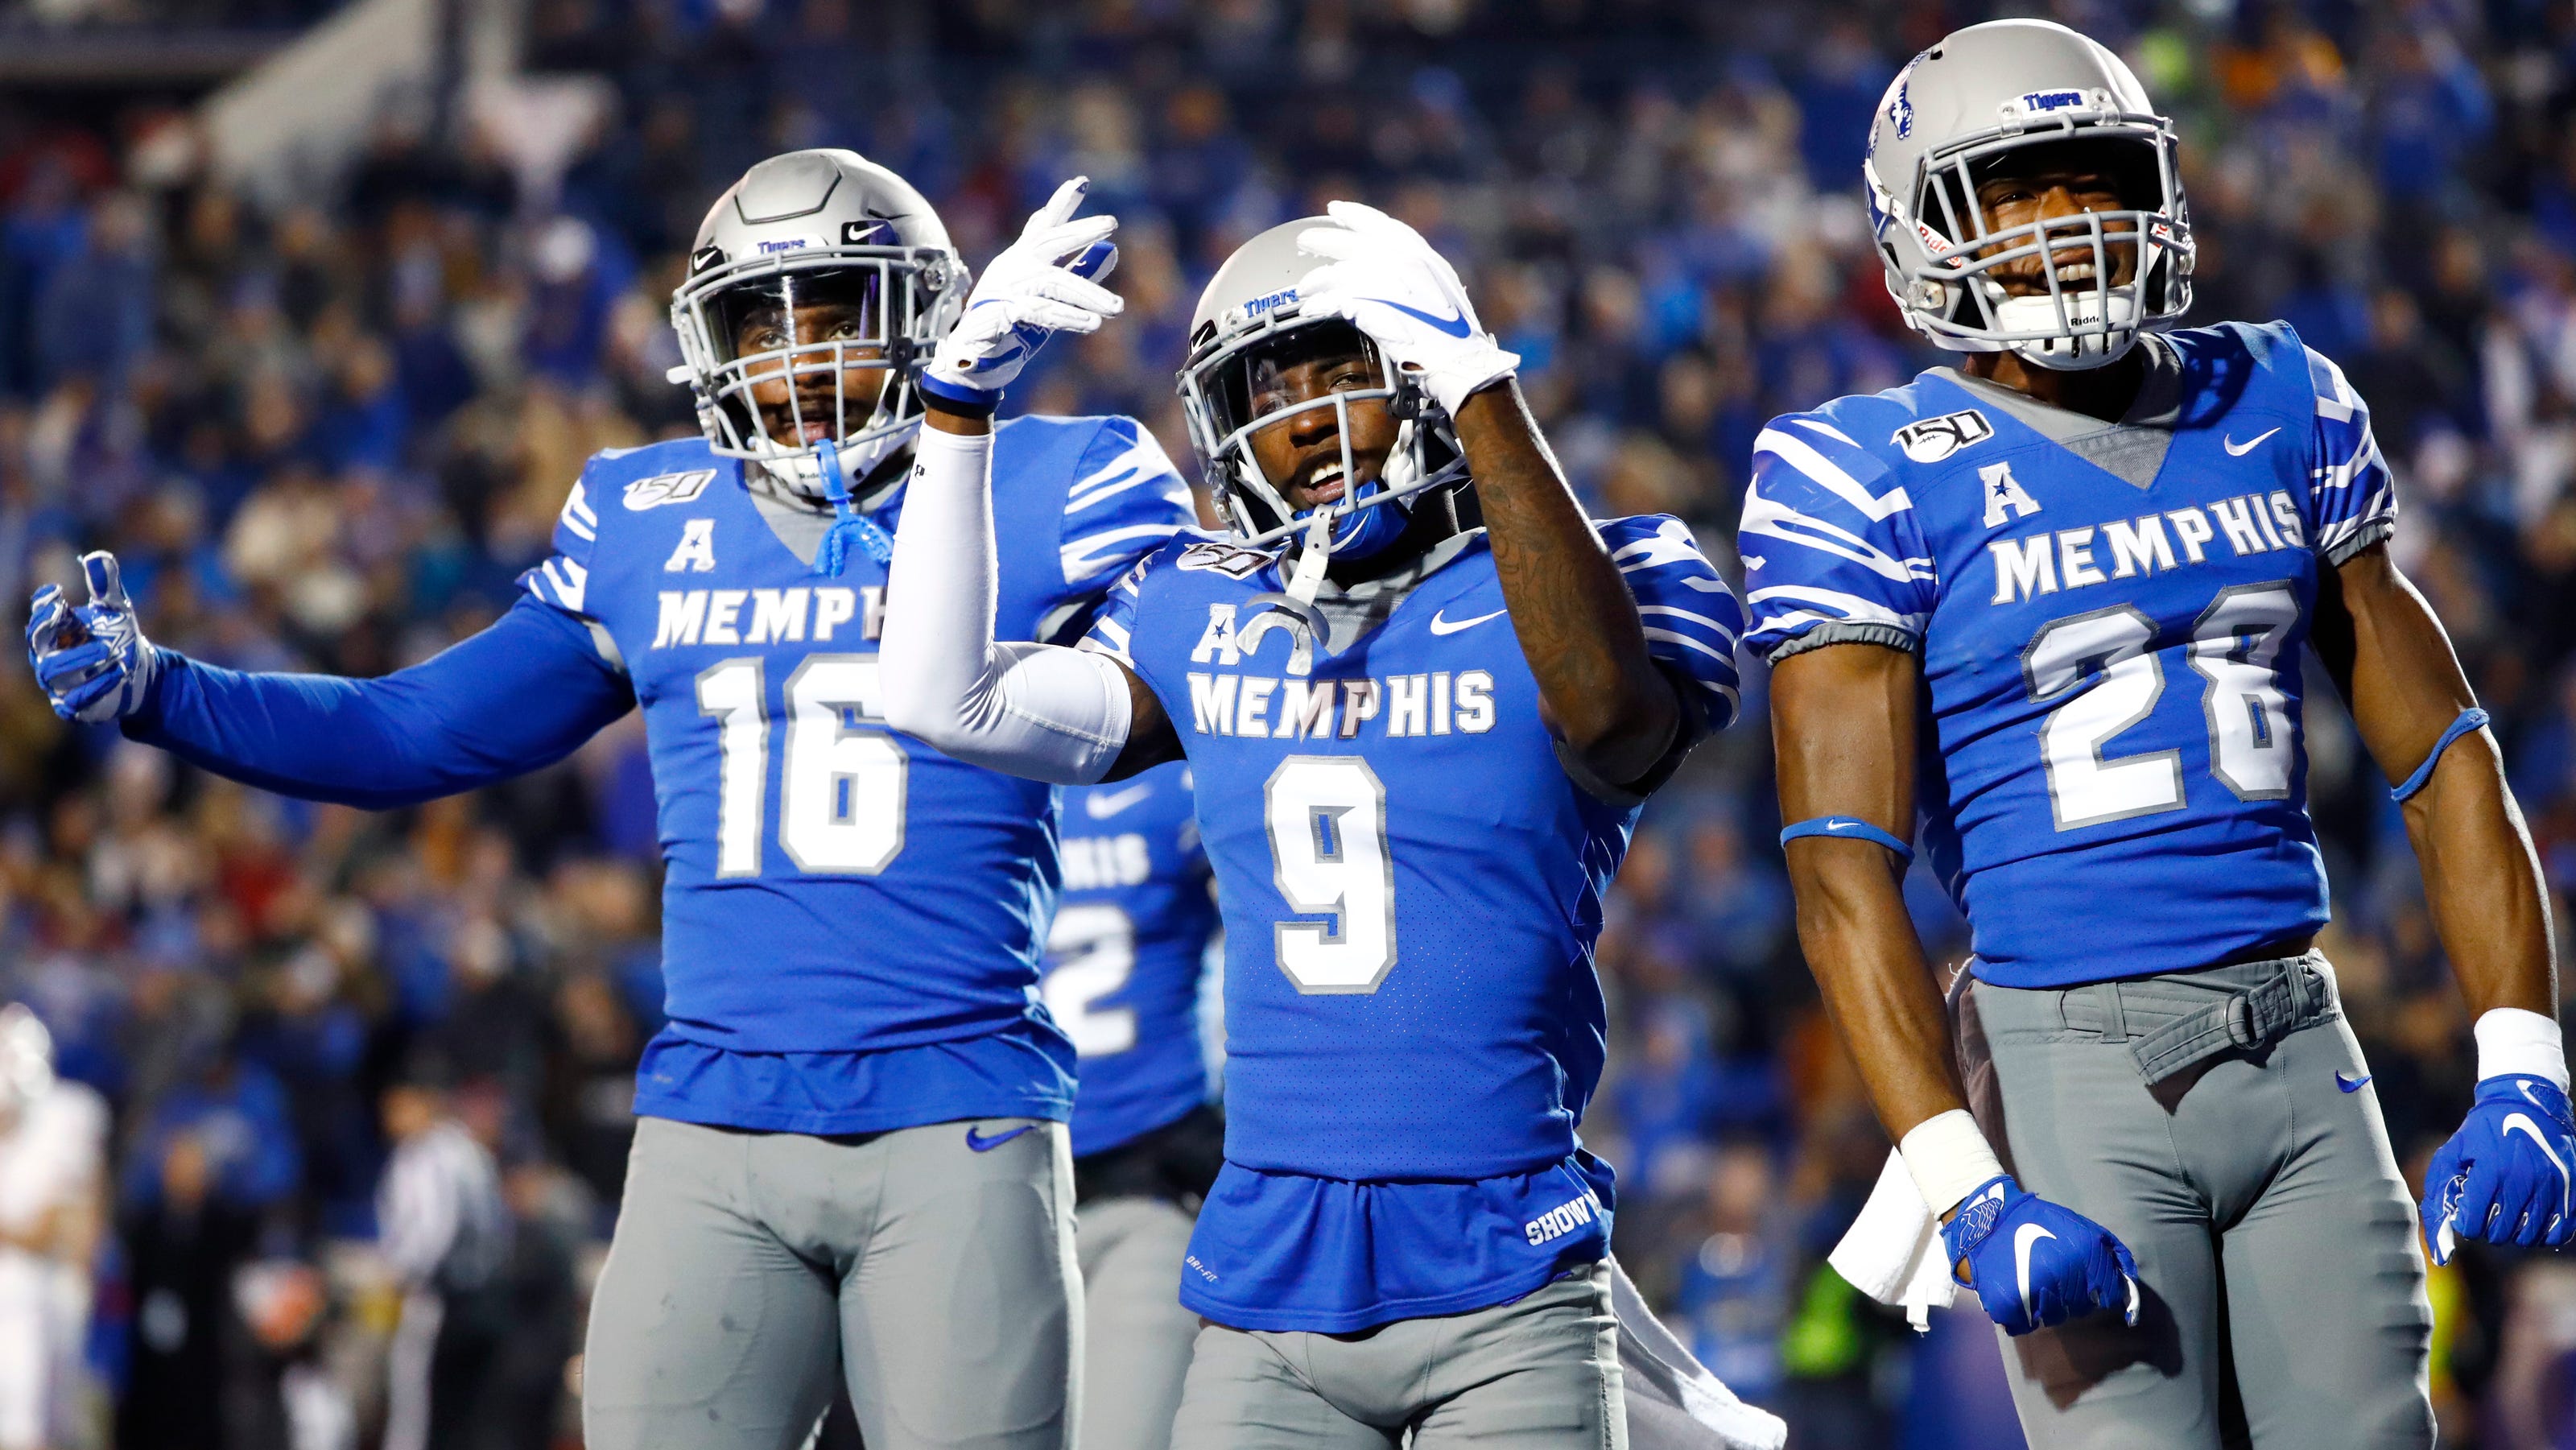 Memphis football Tigers ranked No. 19 after SMU win